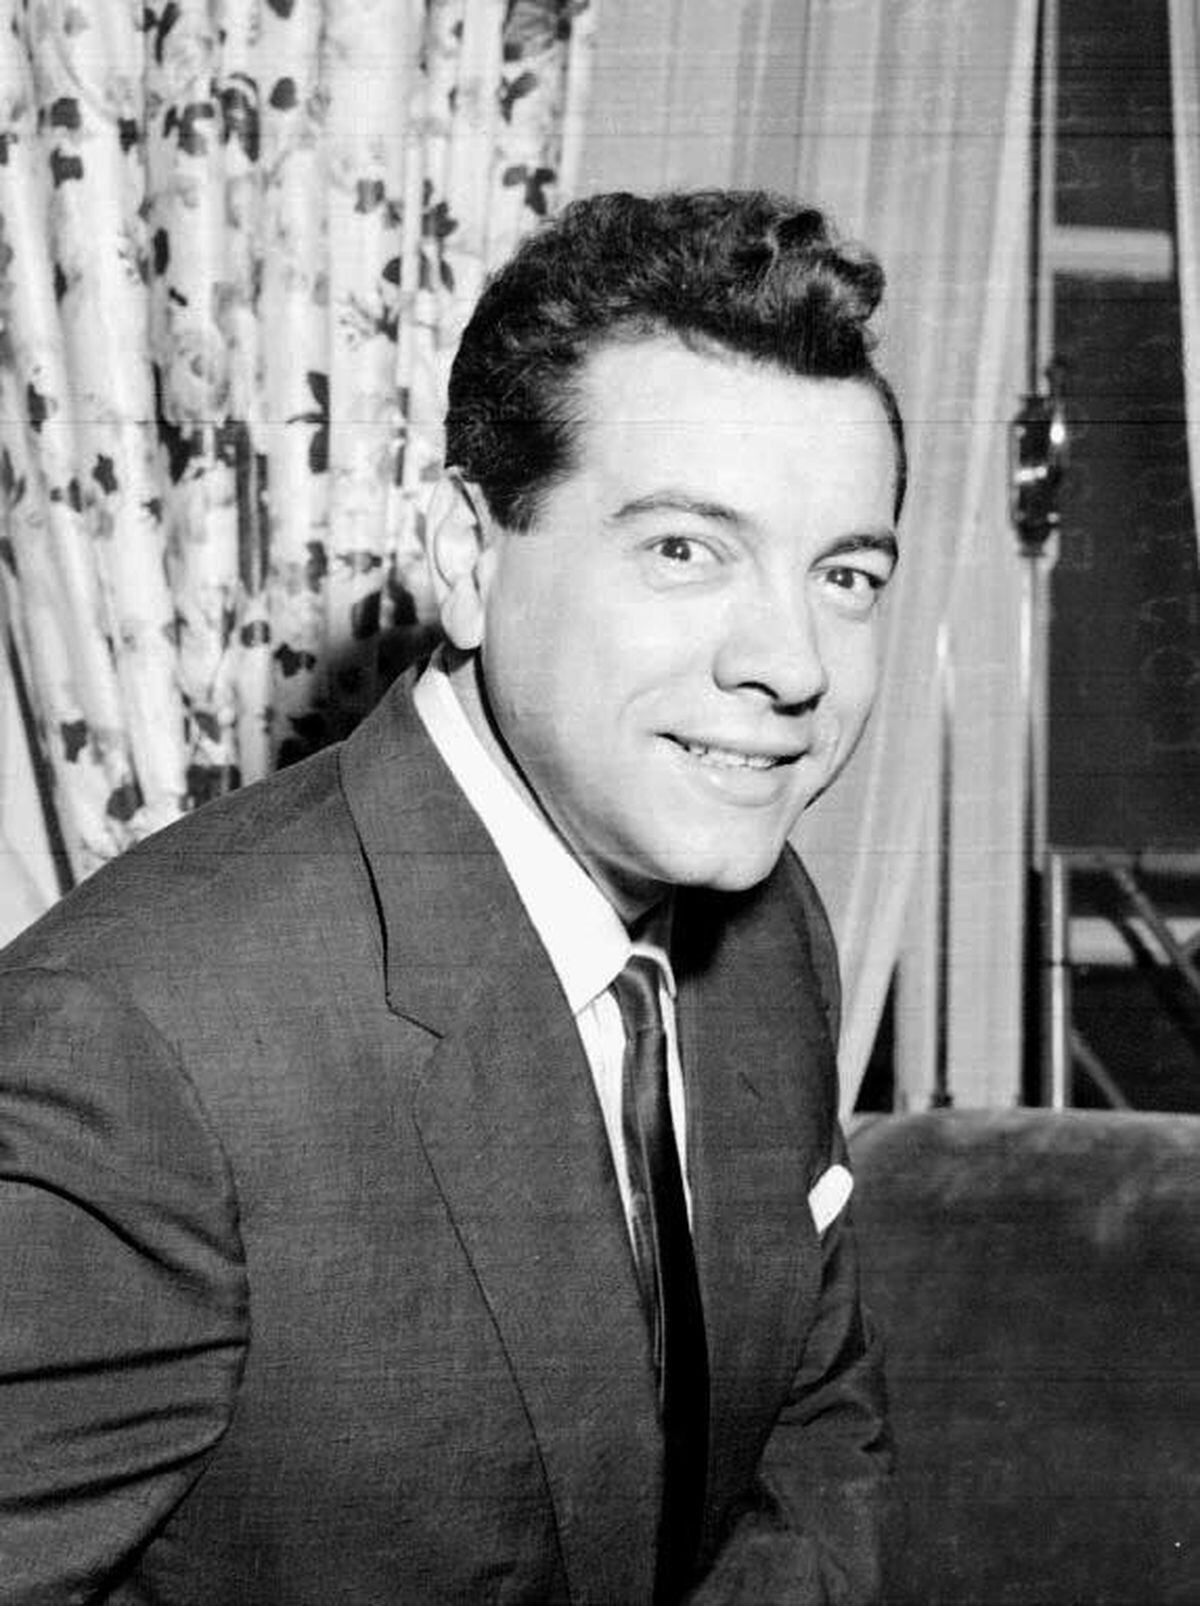 Mario Lanza topped the charts when the Queen took the throne